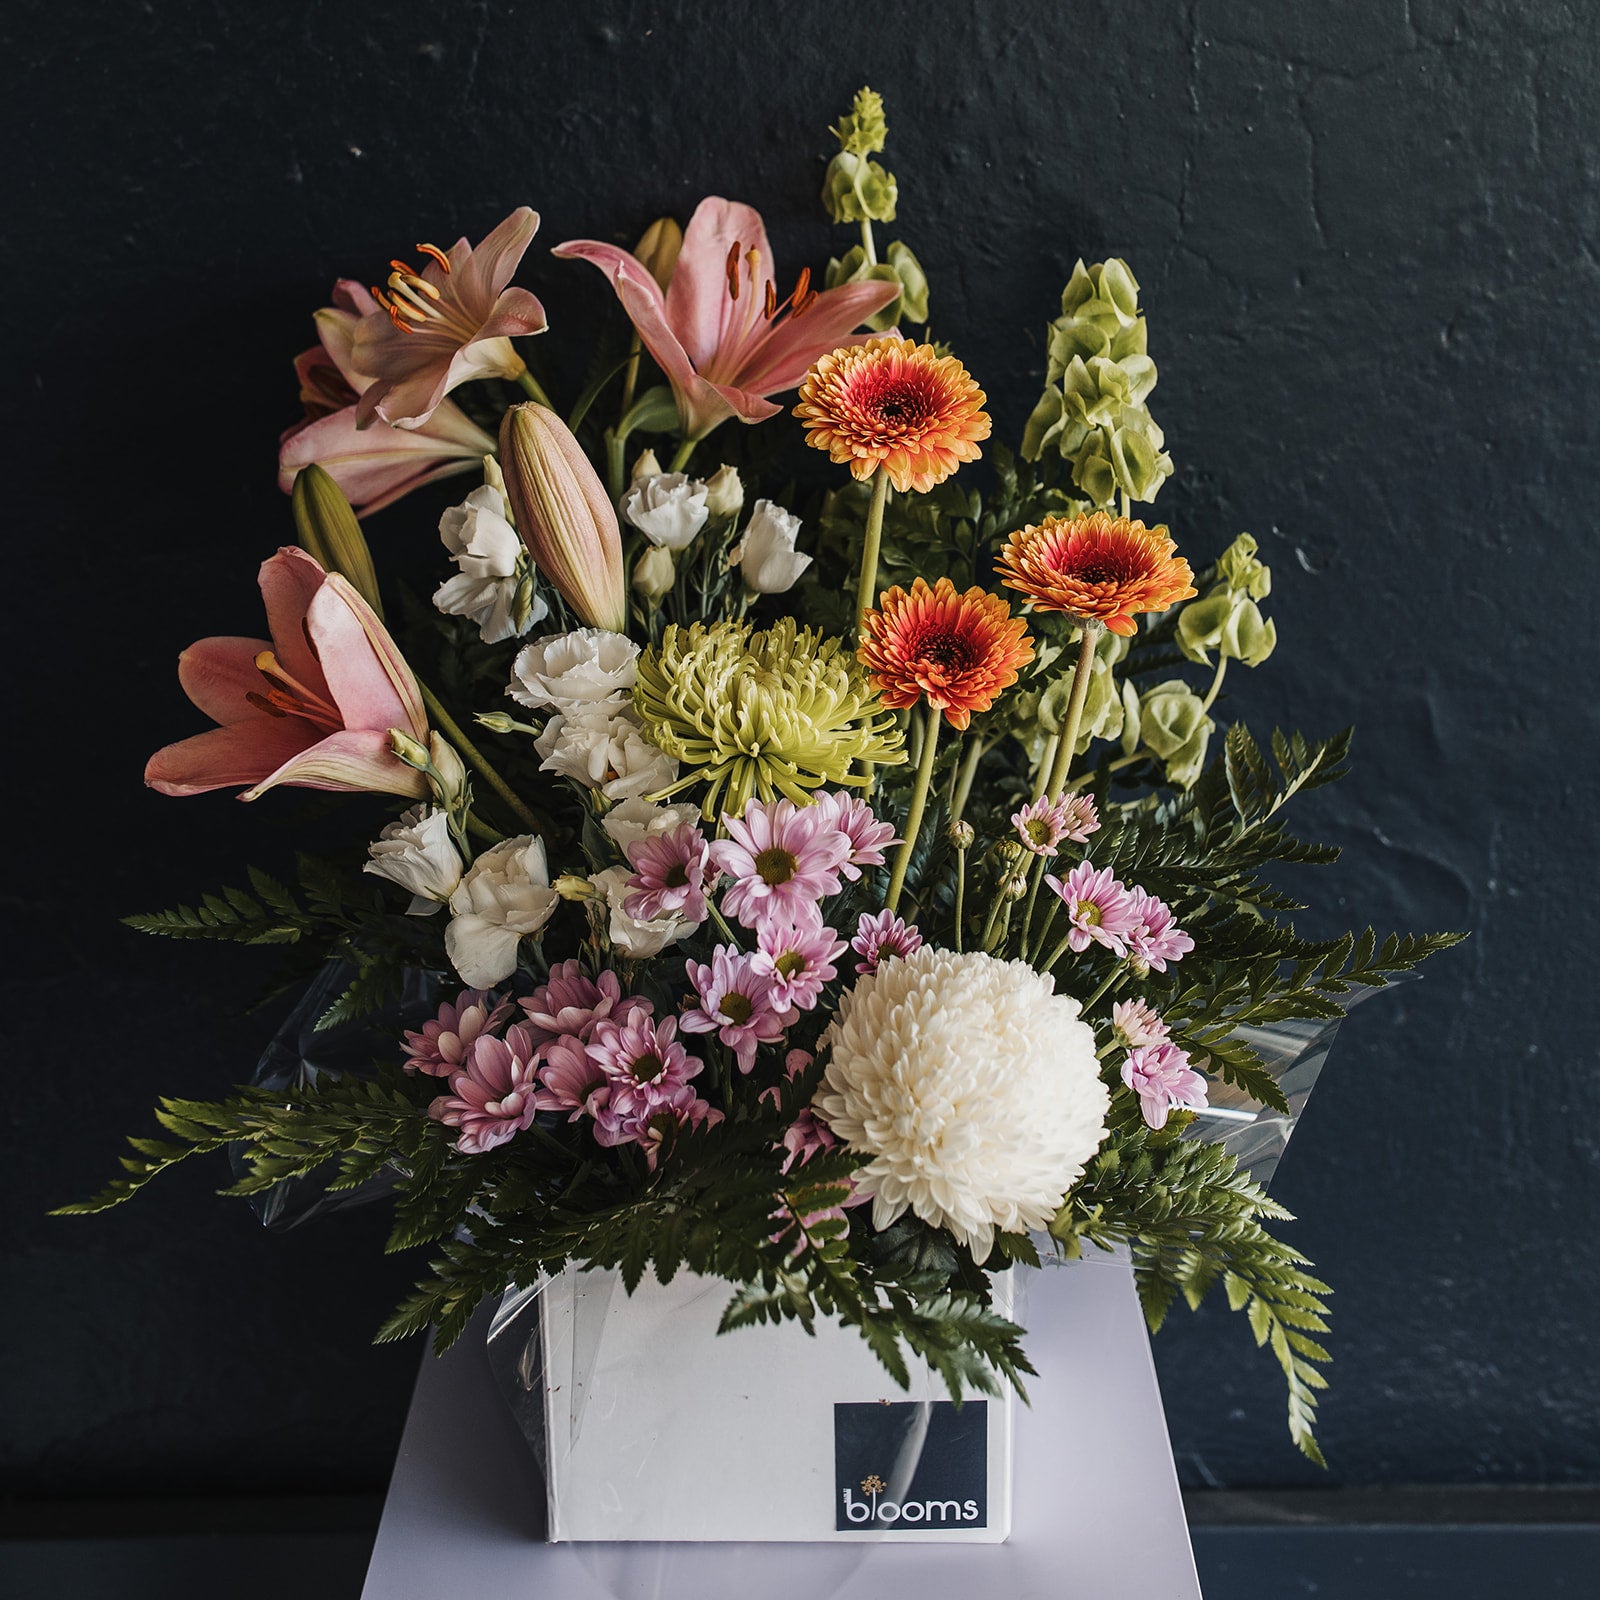 Clare Valley flower delivery showing a Bloom Box arrangement with bright flowers including lillies, lisianthus, gerberas and chrysanthemums.